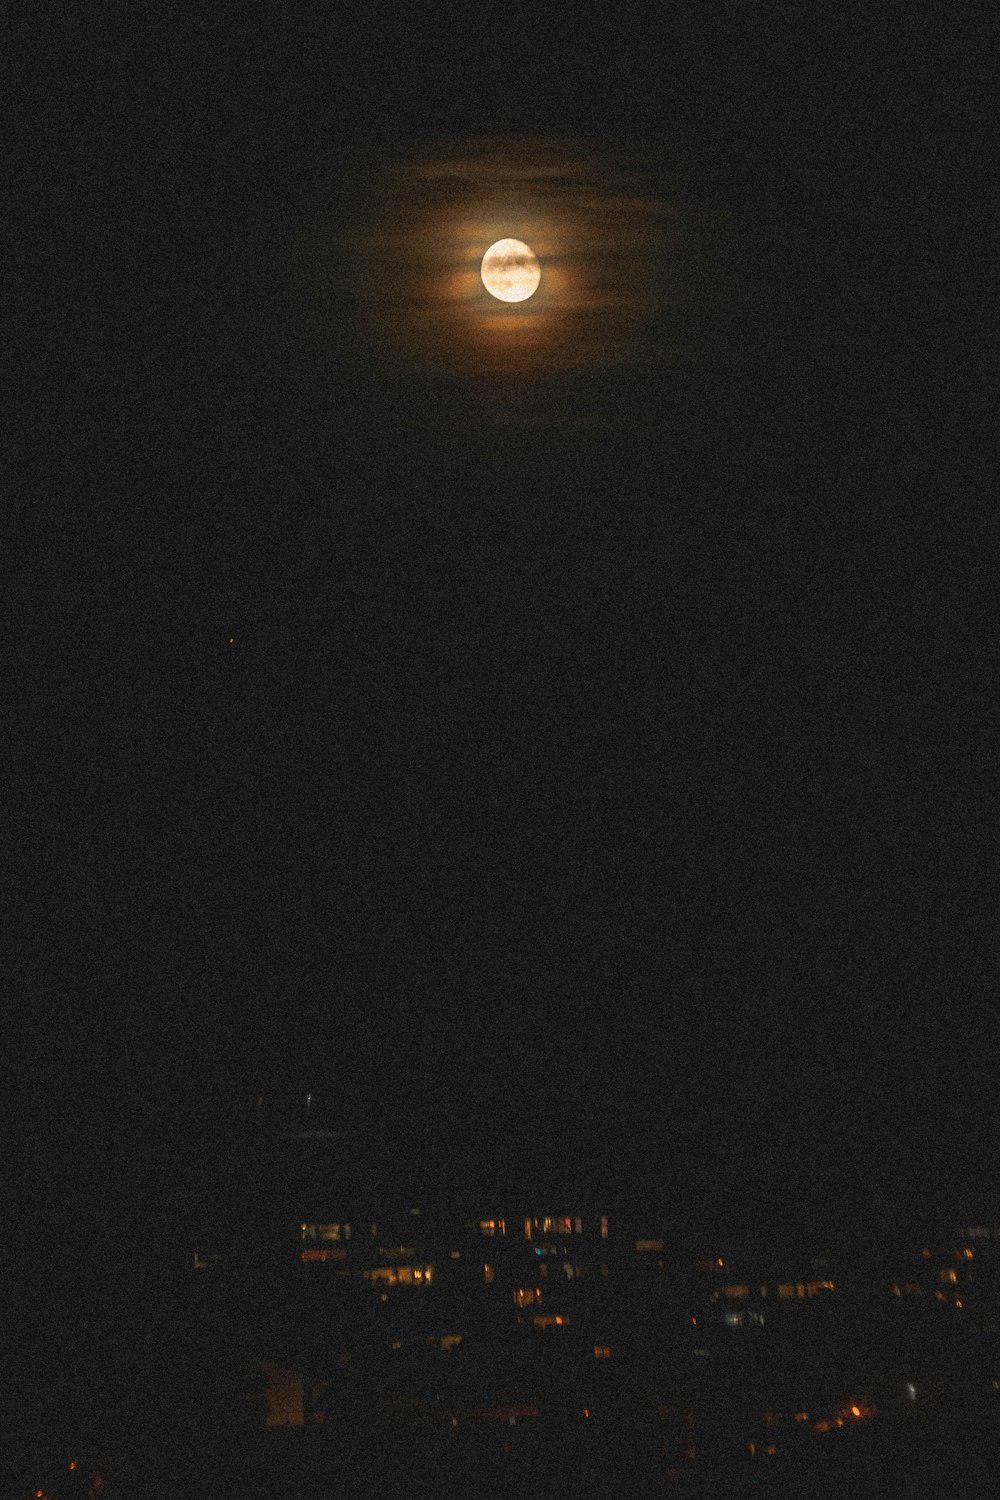 a full moon seen over a city at night